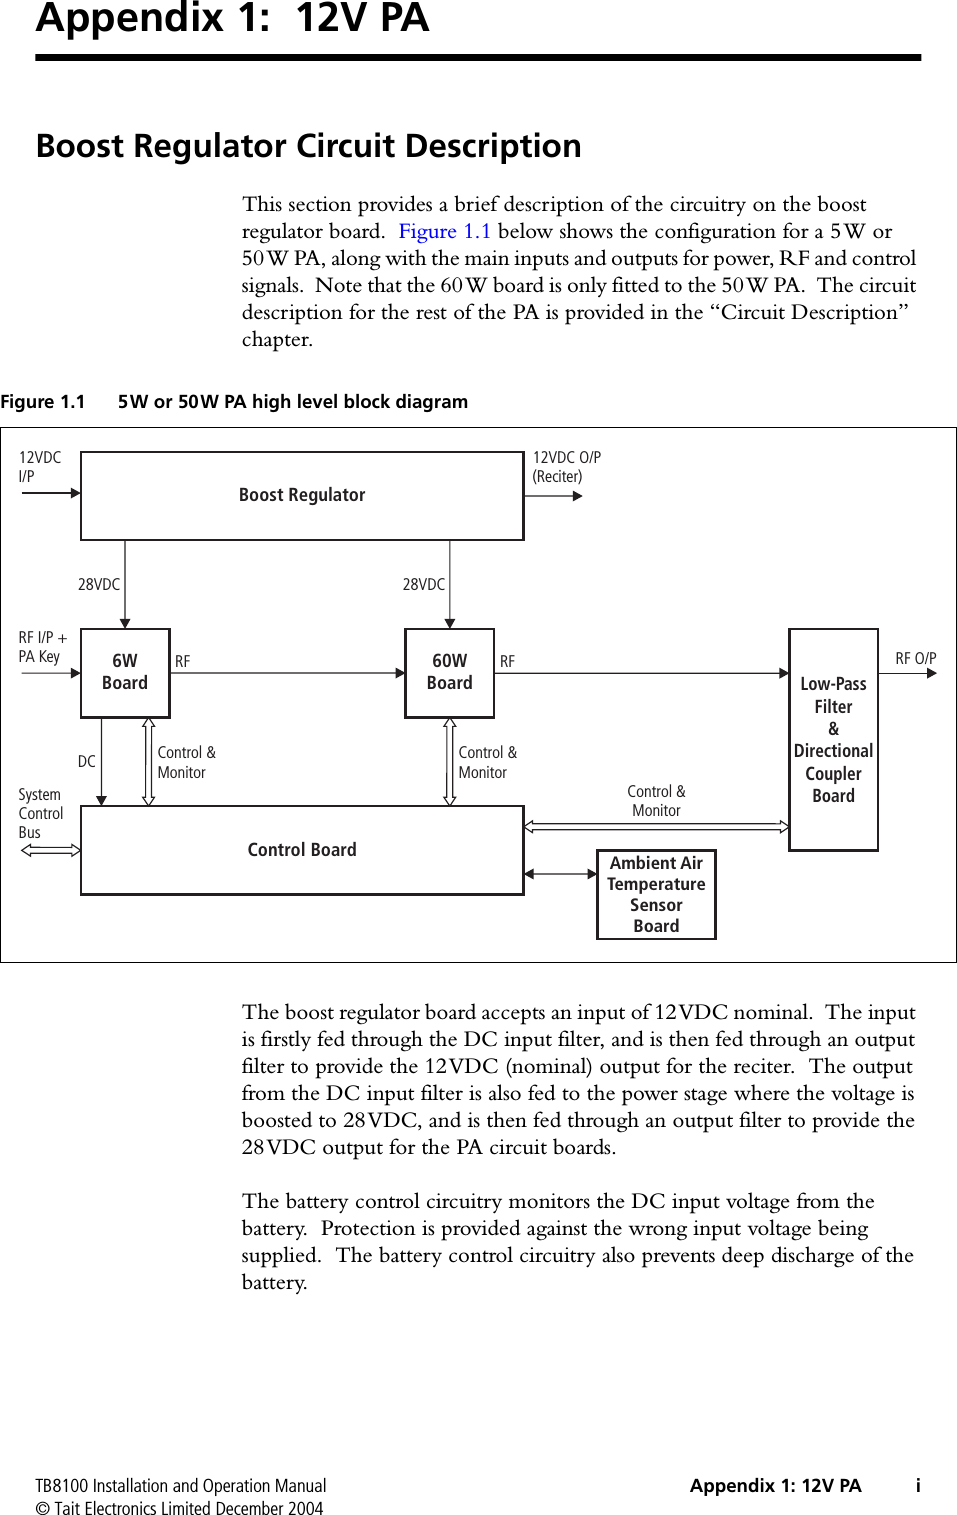  TB8100 Installation and Operation Manual Appendix 1: 12V PA i© Tait Electronics Limited December 2004Appendix 1:  12V PABoost Regulator Circuit DescriptionThis section provides a brief description of the circuitry on the boost regulator board.  Figure 1.1 below shows the configuration for a 5W or 50W PA, along with the main inputs and outputs for power, RF and control signals.  Note that the 60W board is only fitted to the 50W PA.  The circuit description for the rest of the PA is provided in the “Circuit Description” chapter.The boost regulator board accepts an input of 12VDC nominal.  The input is firstly fed through the DC input filter, and is then fed through an output filter to provide the 12VDC (nominal) output for the reciter.  The output from the DC input filter is also fed to the power stage where the voltage is boosted to 28VDC, and is then fed through an output filter to provide the 28VDC output for the PA circuit boards.  The battery control circuitry monitors the DC input voltage from the battery.  Protection is provided against the wrong input voltage being supplied.  The battery control circuitry also prevents deep discharge of the battery.Figure 1.1 5W or 50W PA high level block diagram6WBoardControl BoardBoost Regulator60WBoardAmbient AirTemperatureSensorBoardLow-PassFilter&amp;DirectionalCouplerBoardRF I/P +PA Key RF O/P12VDCI/P12VDC O/P(Reciter)DC28VDC28VDCRF RFControl &amp;MonitorControl &amp;MonitorControl &amp;MonitorSystemControlBus